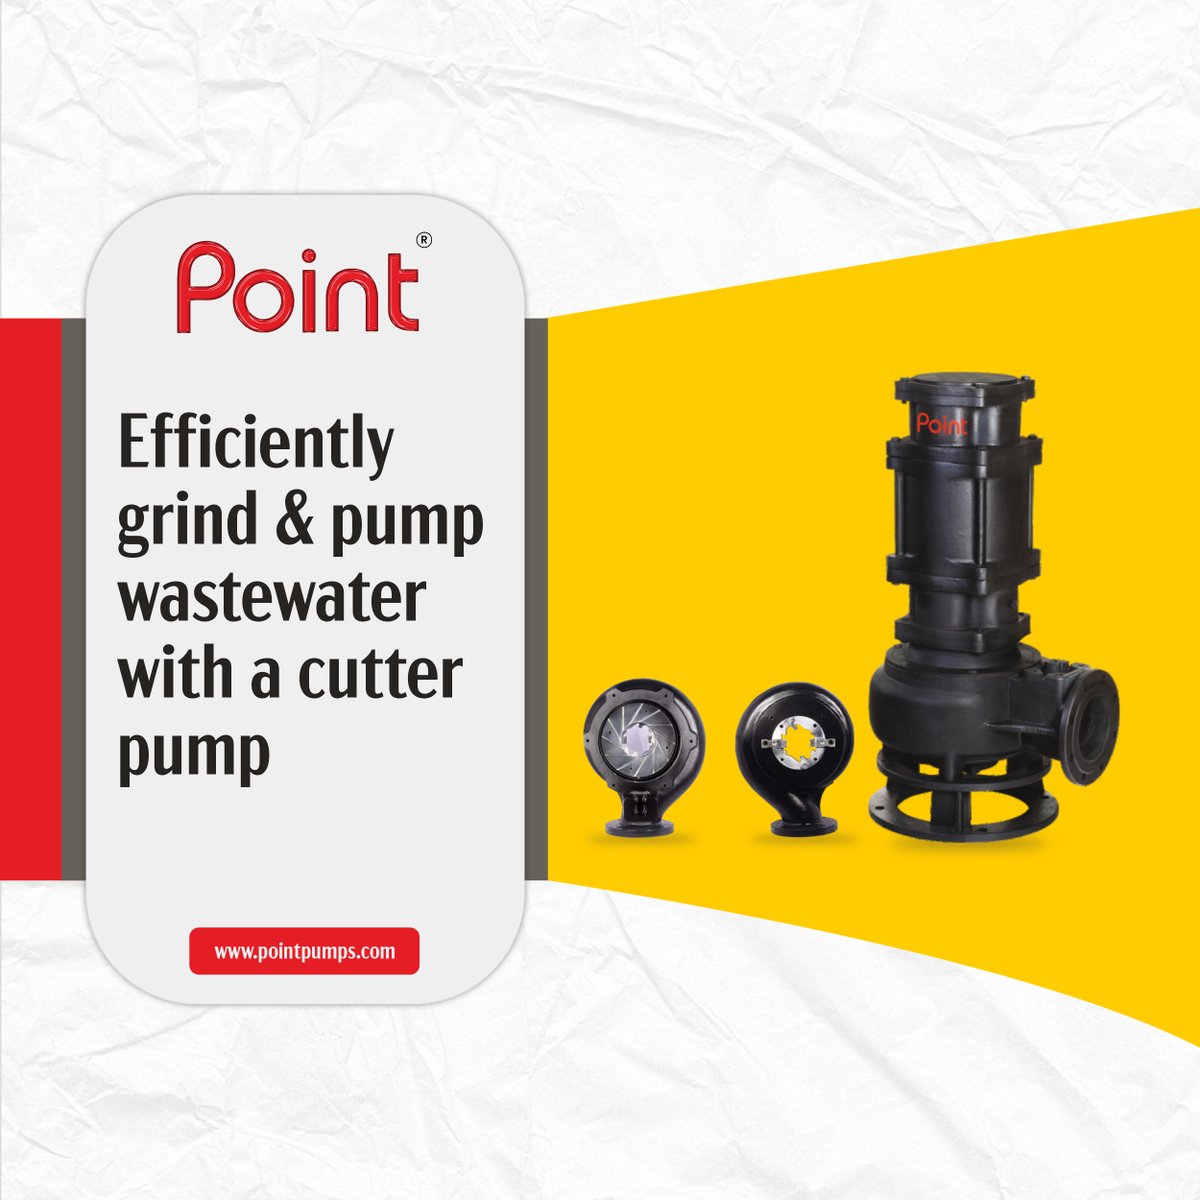 Effortlessly streamline wastewater management with Point Pumps' Cutter Pump, the ultimate solution for efficient shredding and disposal of solids. Ensure uninterrupted operations. Discover more at pointpumps.com. For inquiries, call +91-90477 77757. #WastewaterManagement